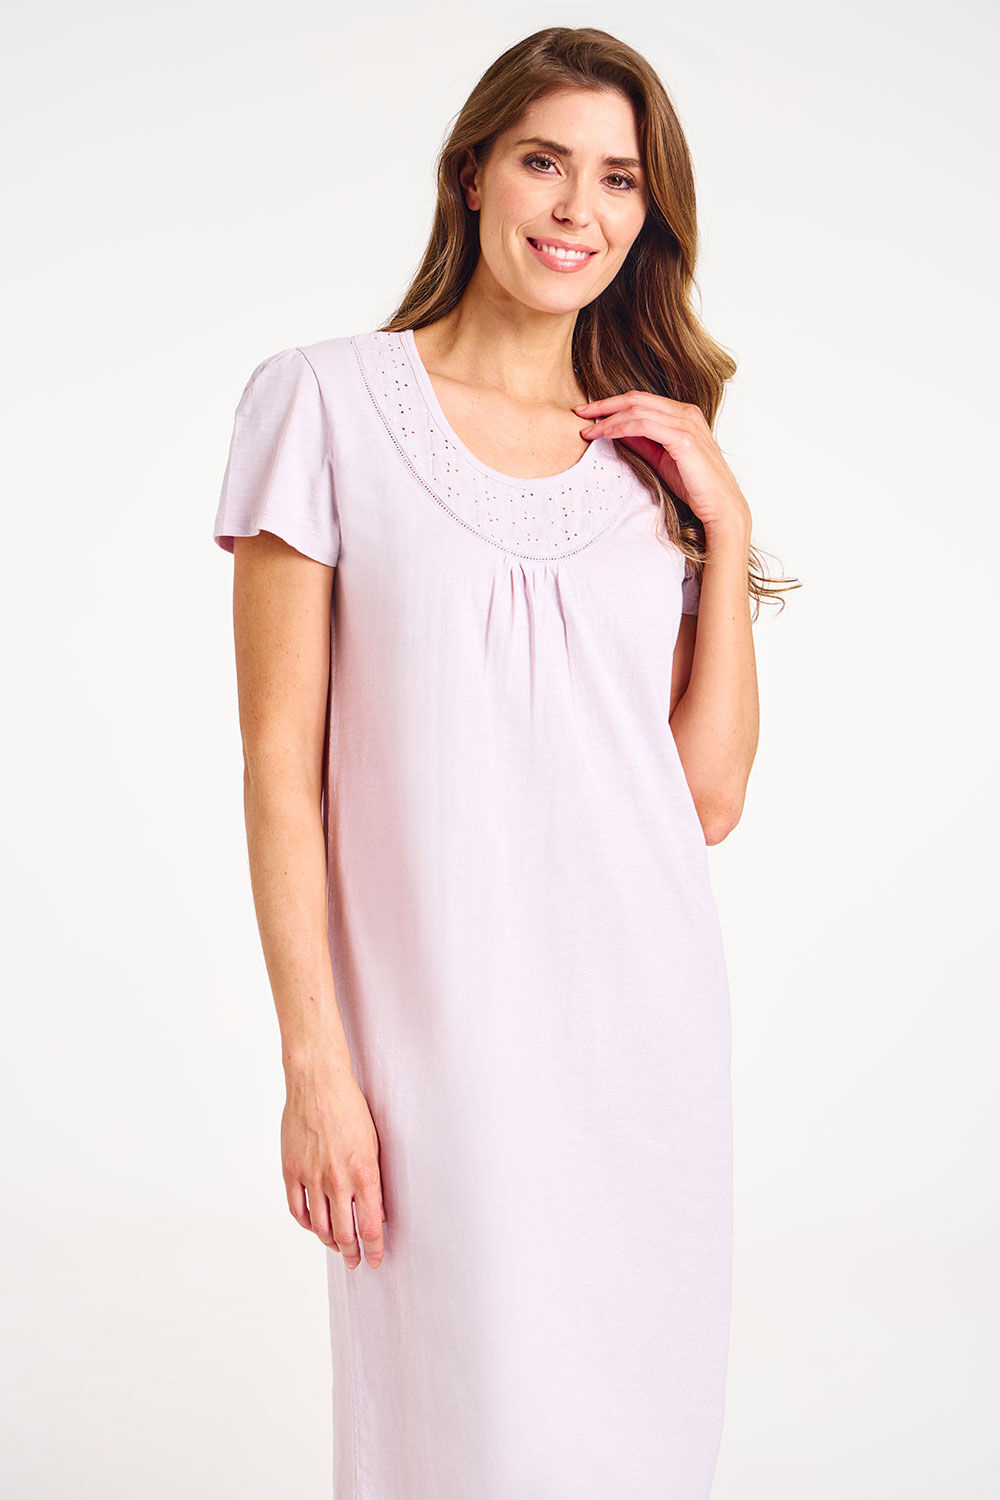 Bonmarche Lilac Short Sleeve Broderie and Jersey Nightdress, Size: 22